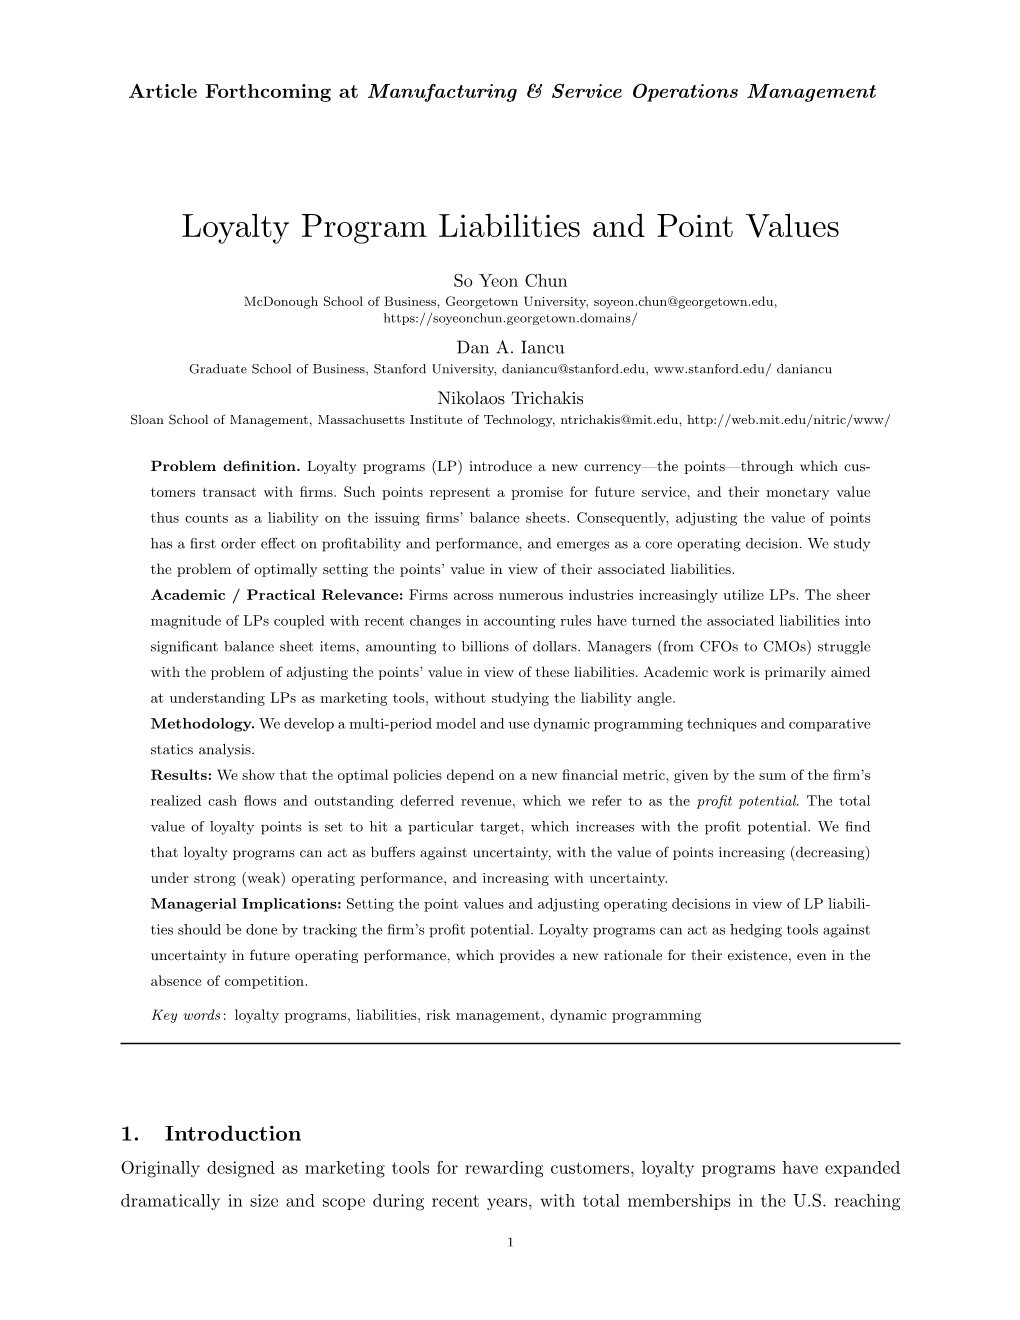 Loyalty Program Liabilities and Point Values